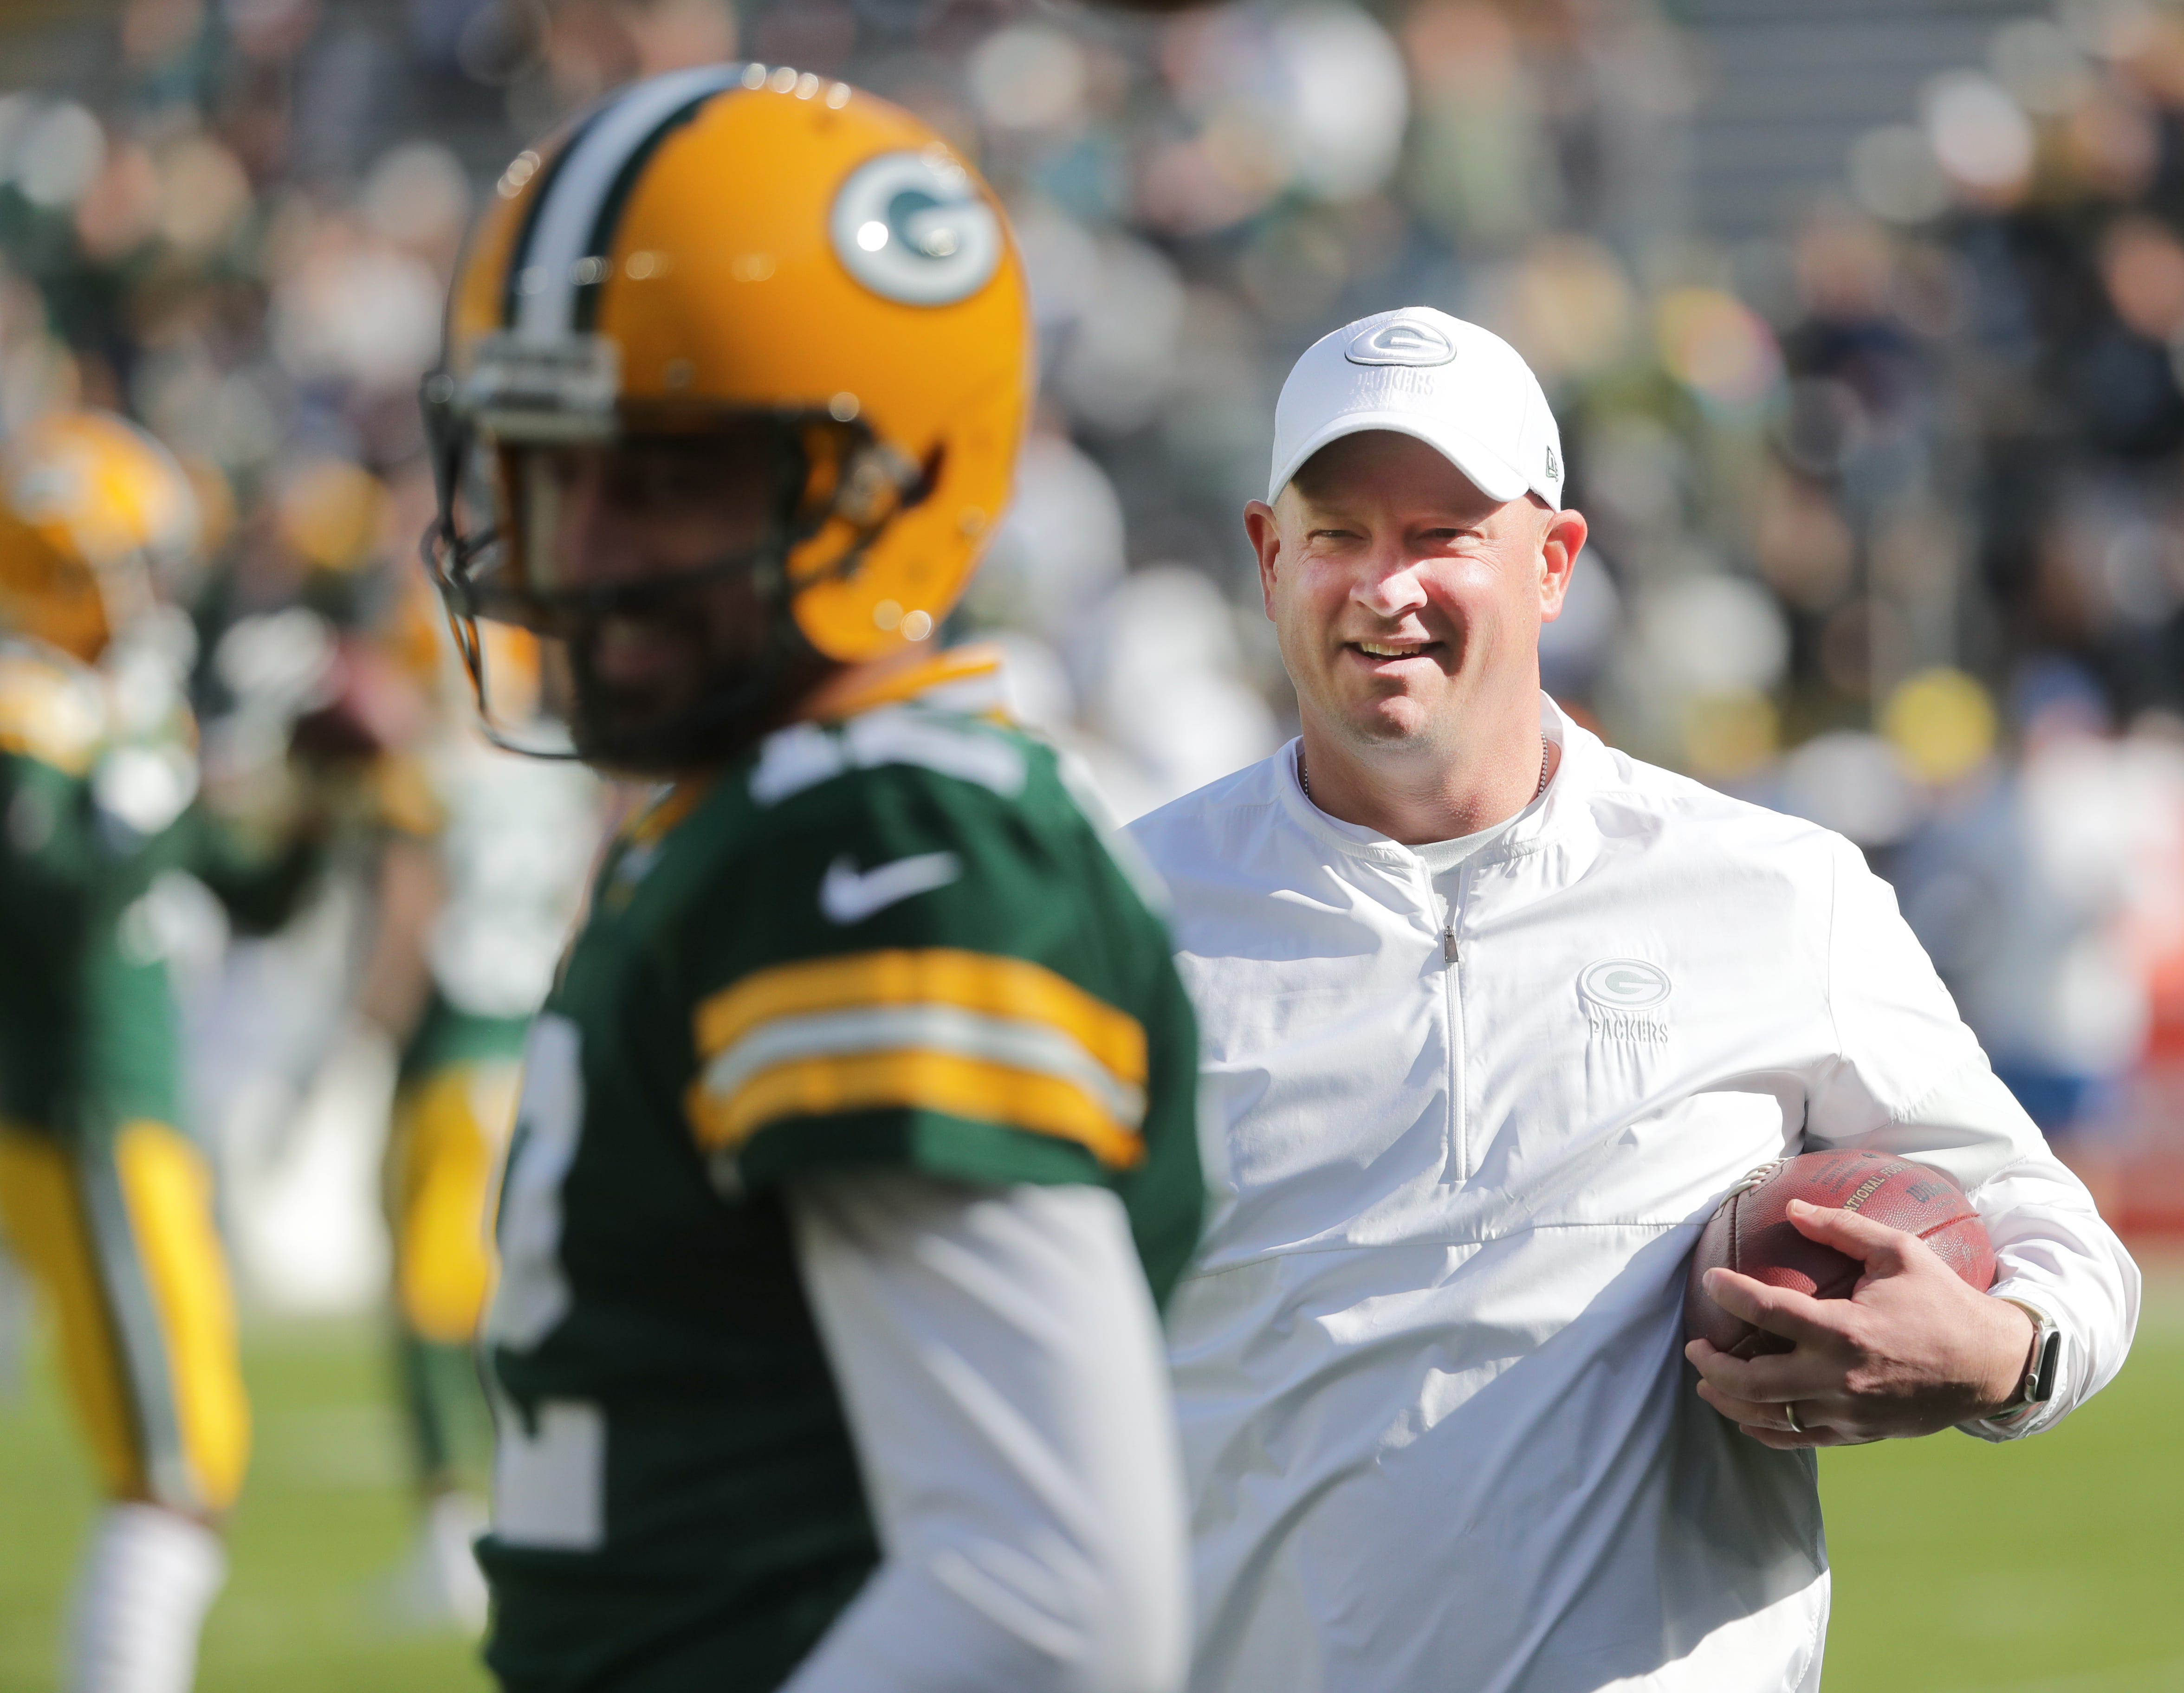 Green Bay Packers offensive coordinator Nathaniel Hackett talks with quarterback Aaron Rodgers (12) before their game against the Oakland Raiders Sunday, October 21, 2019 at Lambeau Field in Green Bay, Wis.